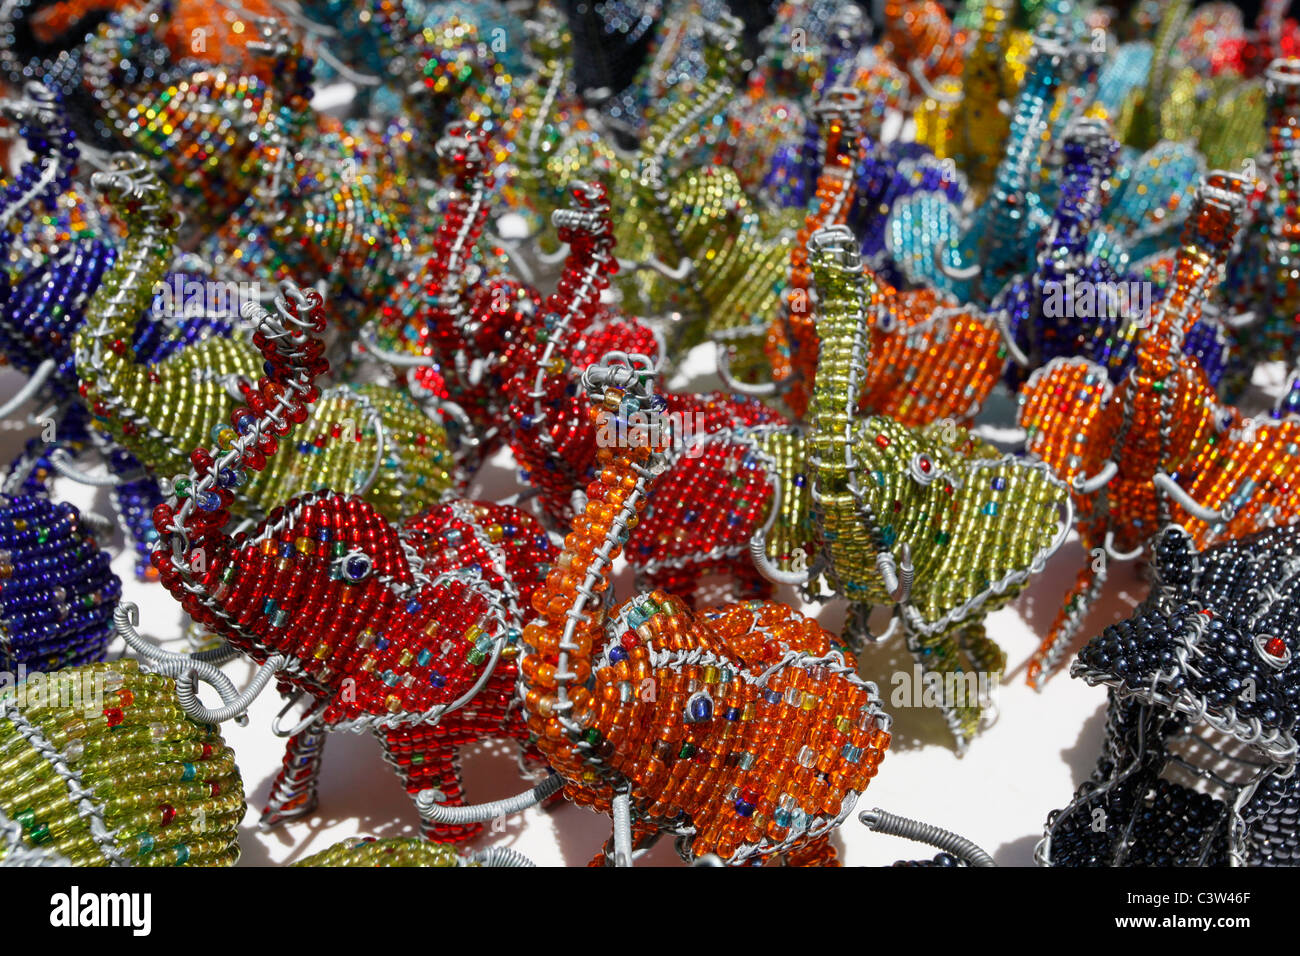 Hand made wire crafts and African animals for sale at the Rosebank market Johannesburg. South Africa. Stock Photo